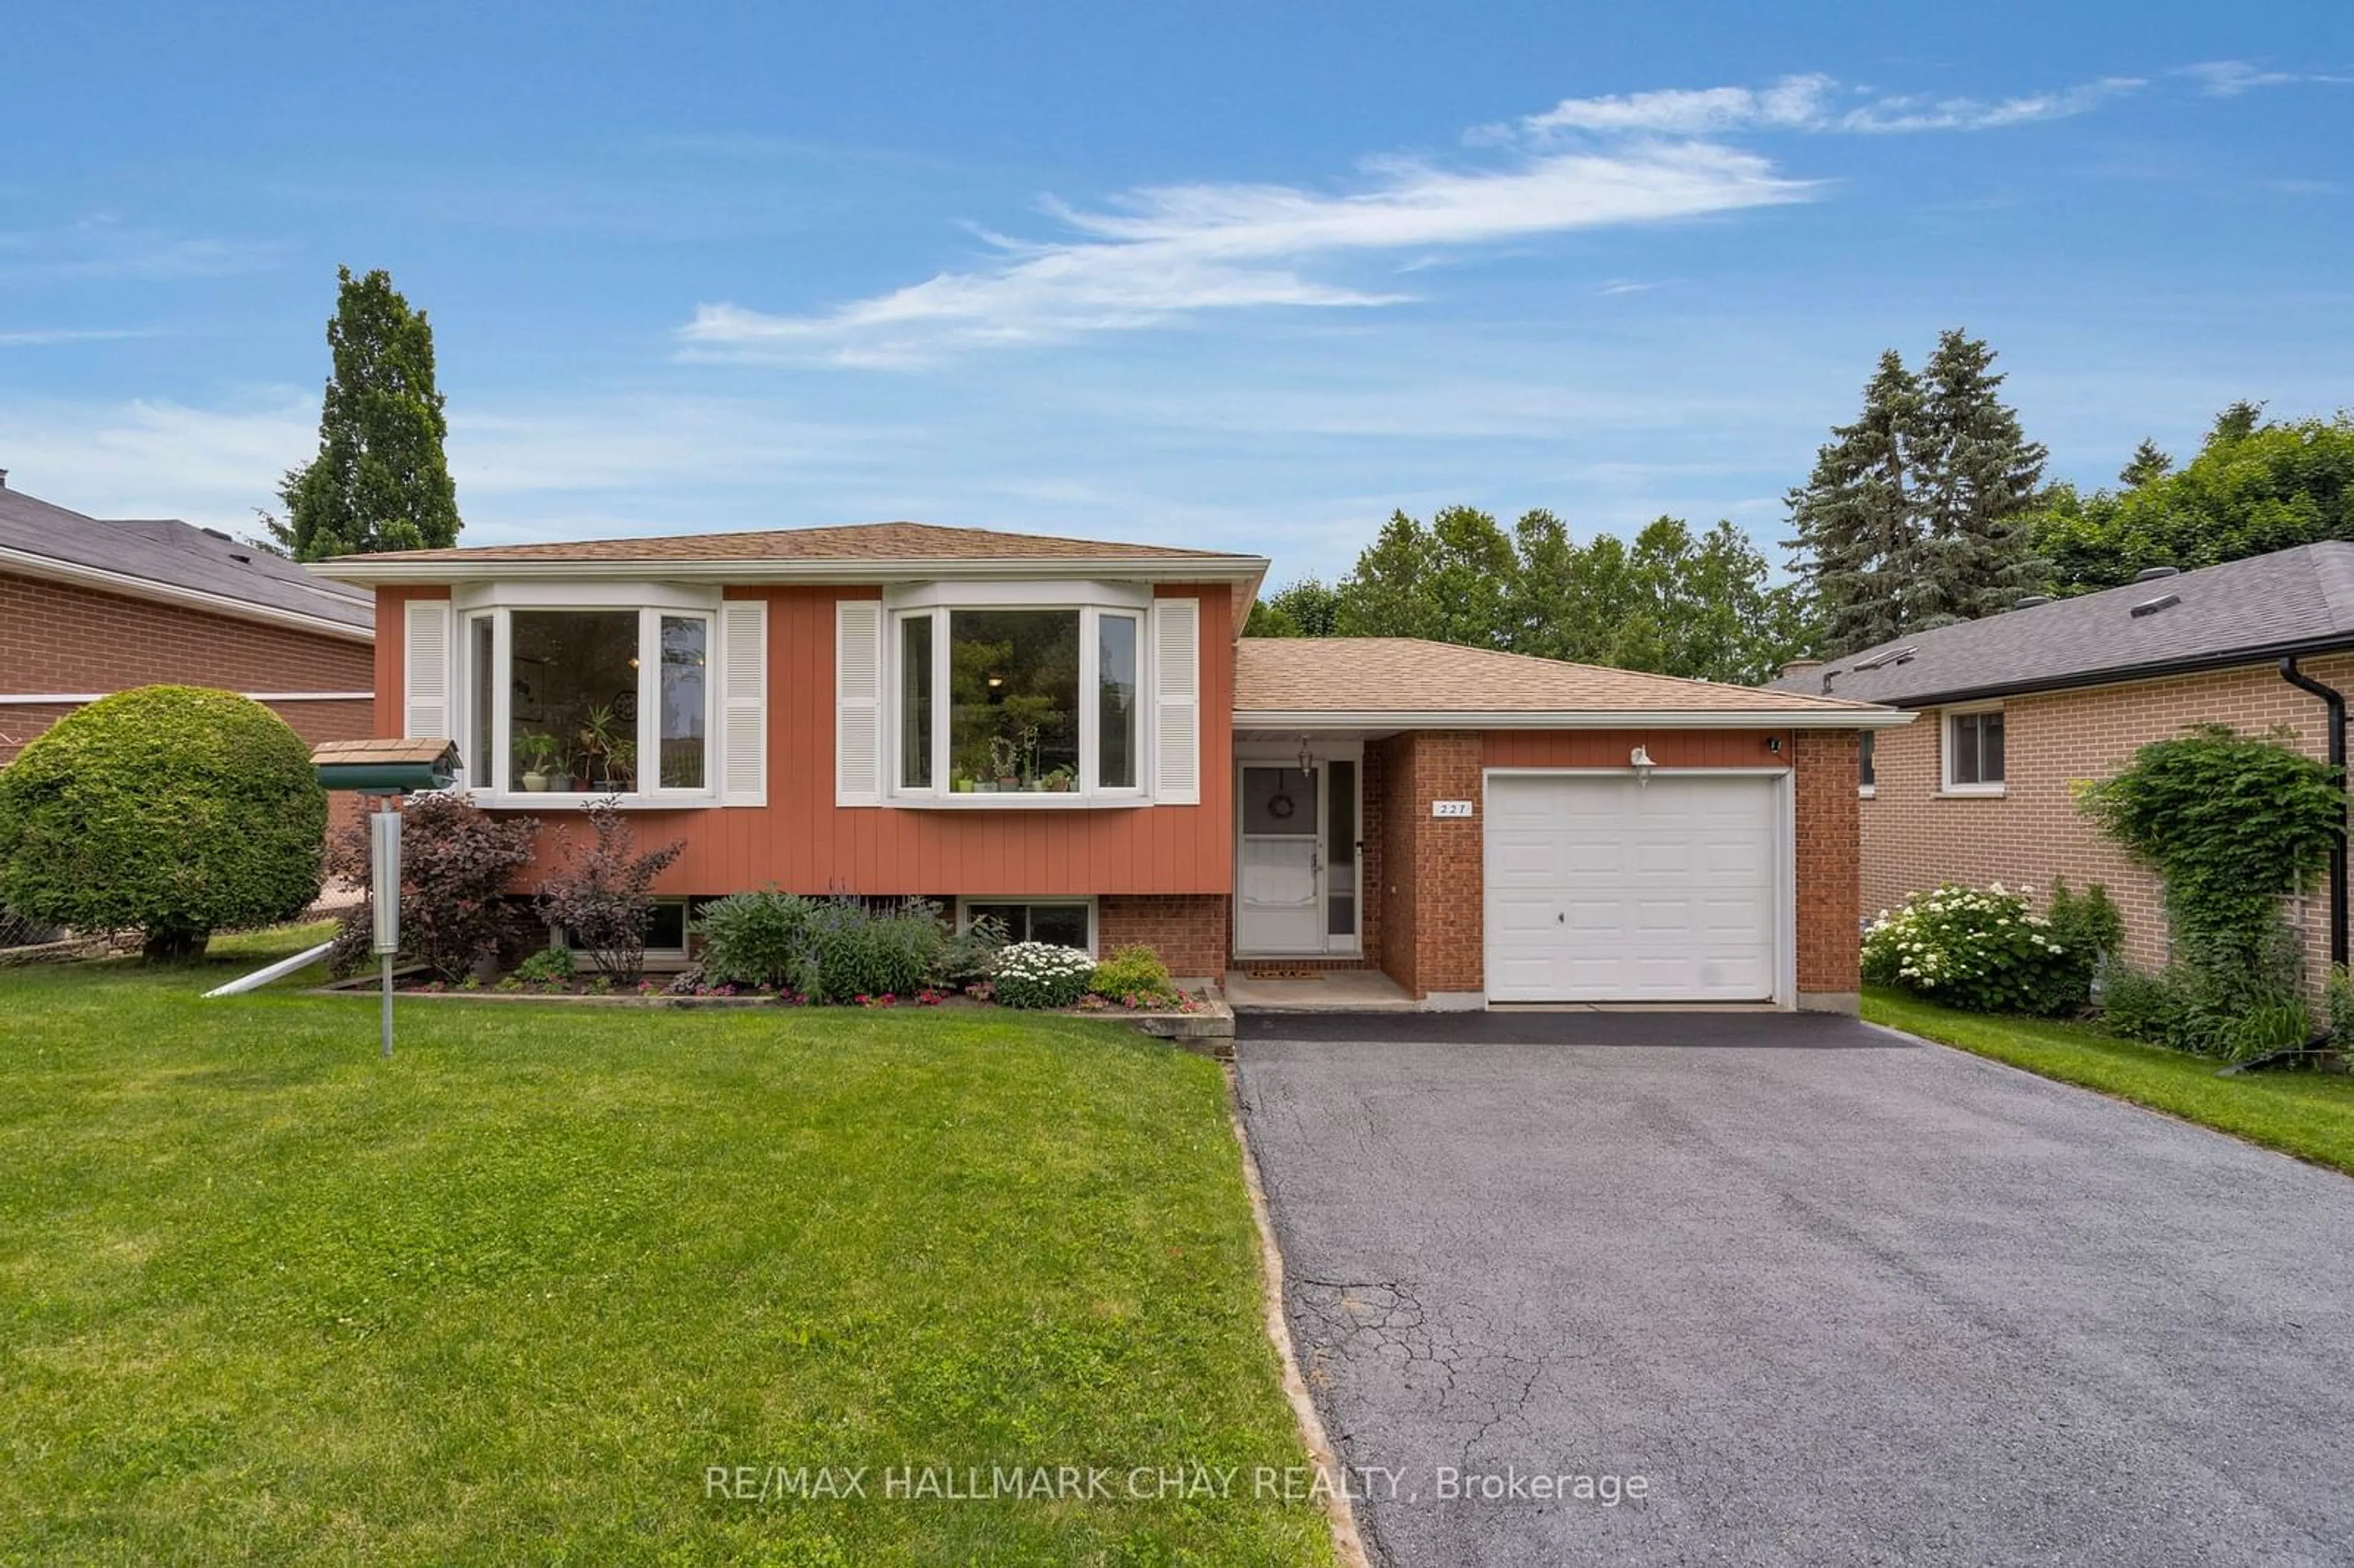 Home with brick exterior material for 227 Rose St, Barrie Ontario L4M 2V3